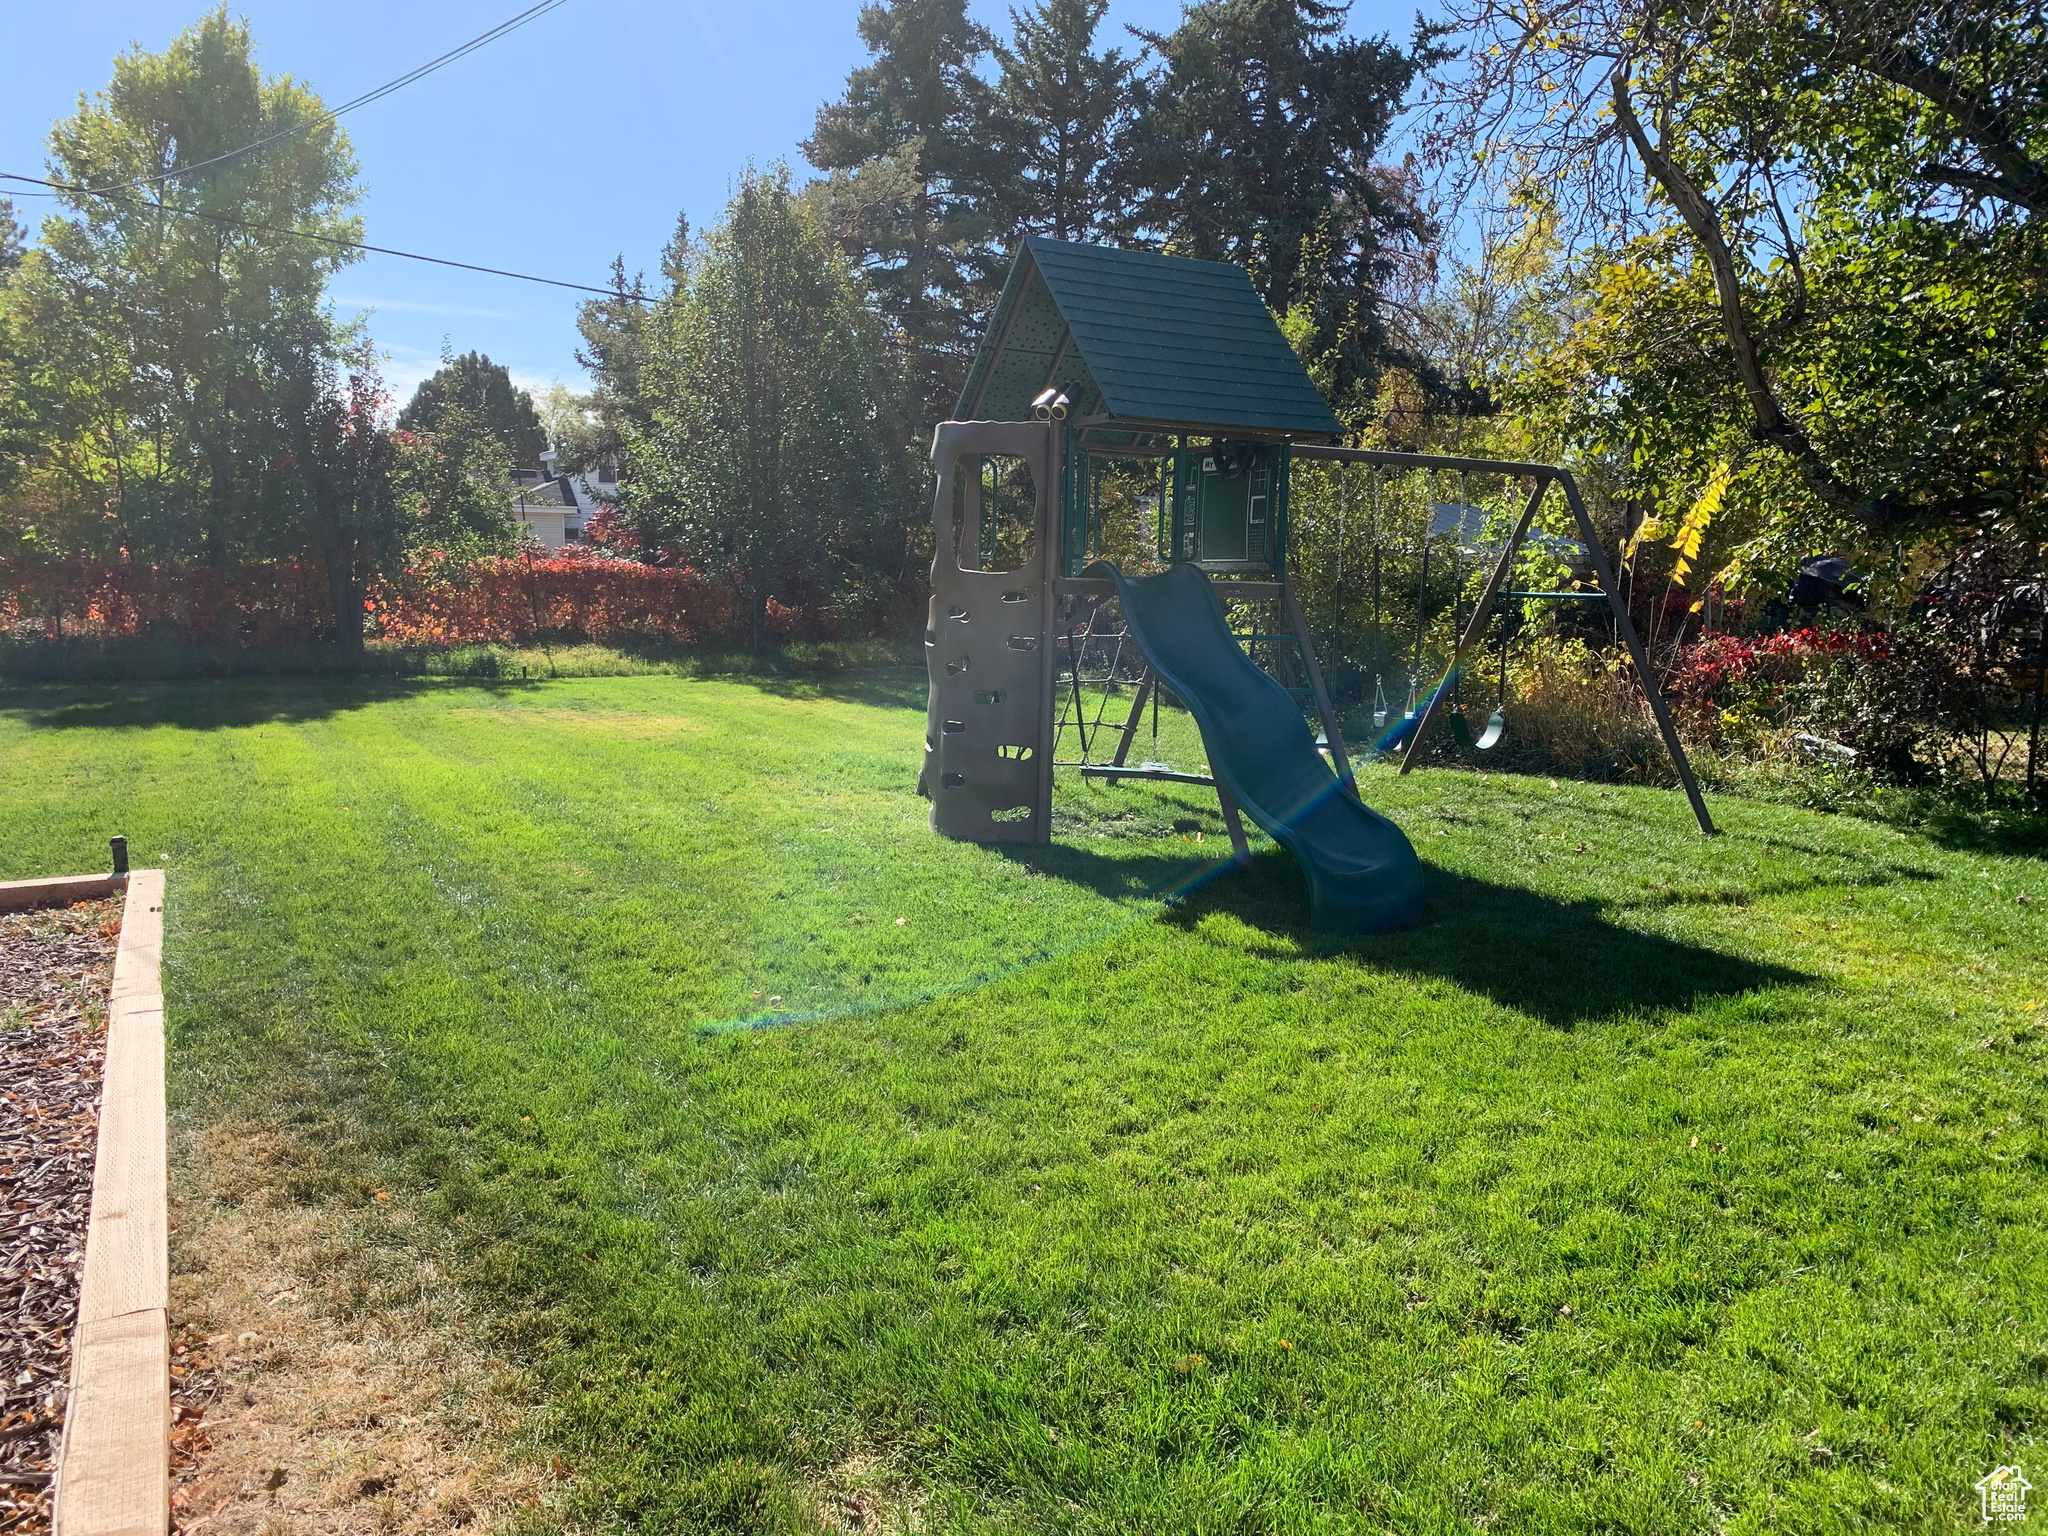 View of playground with a lawn